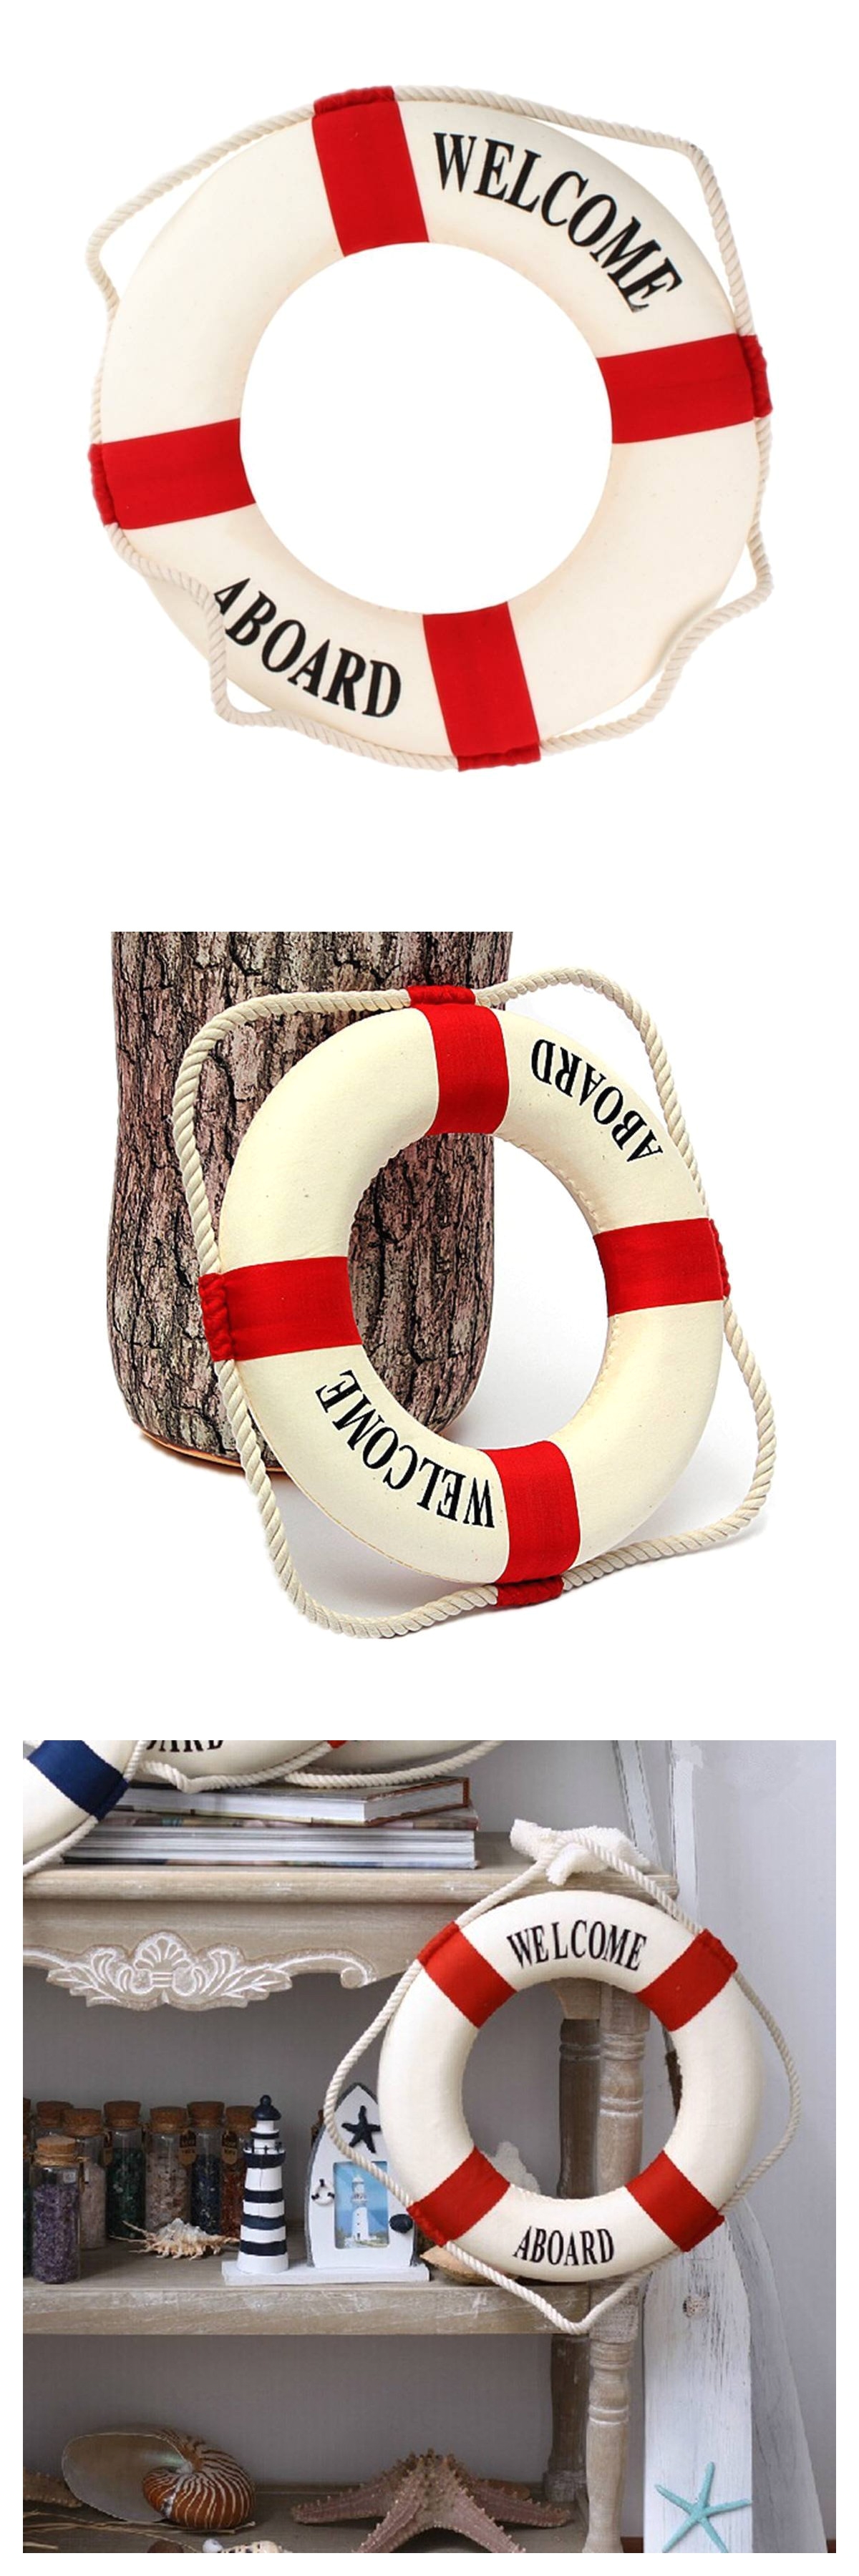 welcome aboard foam nautical life lifebuoy ring boat wall hanging home decoration red 50cm 9 61